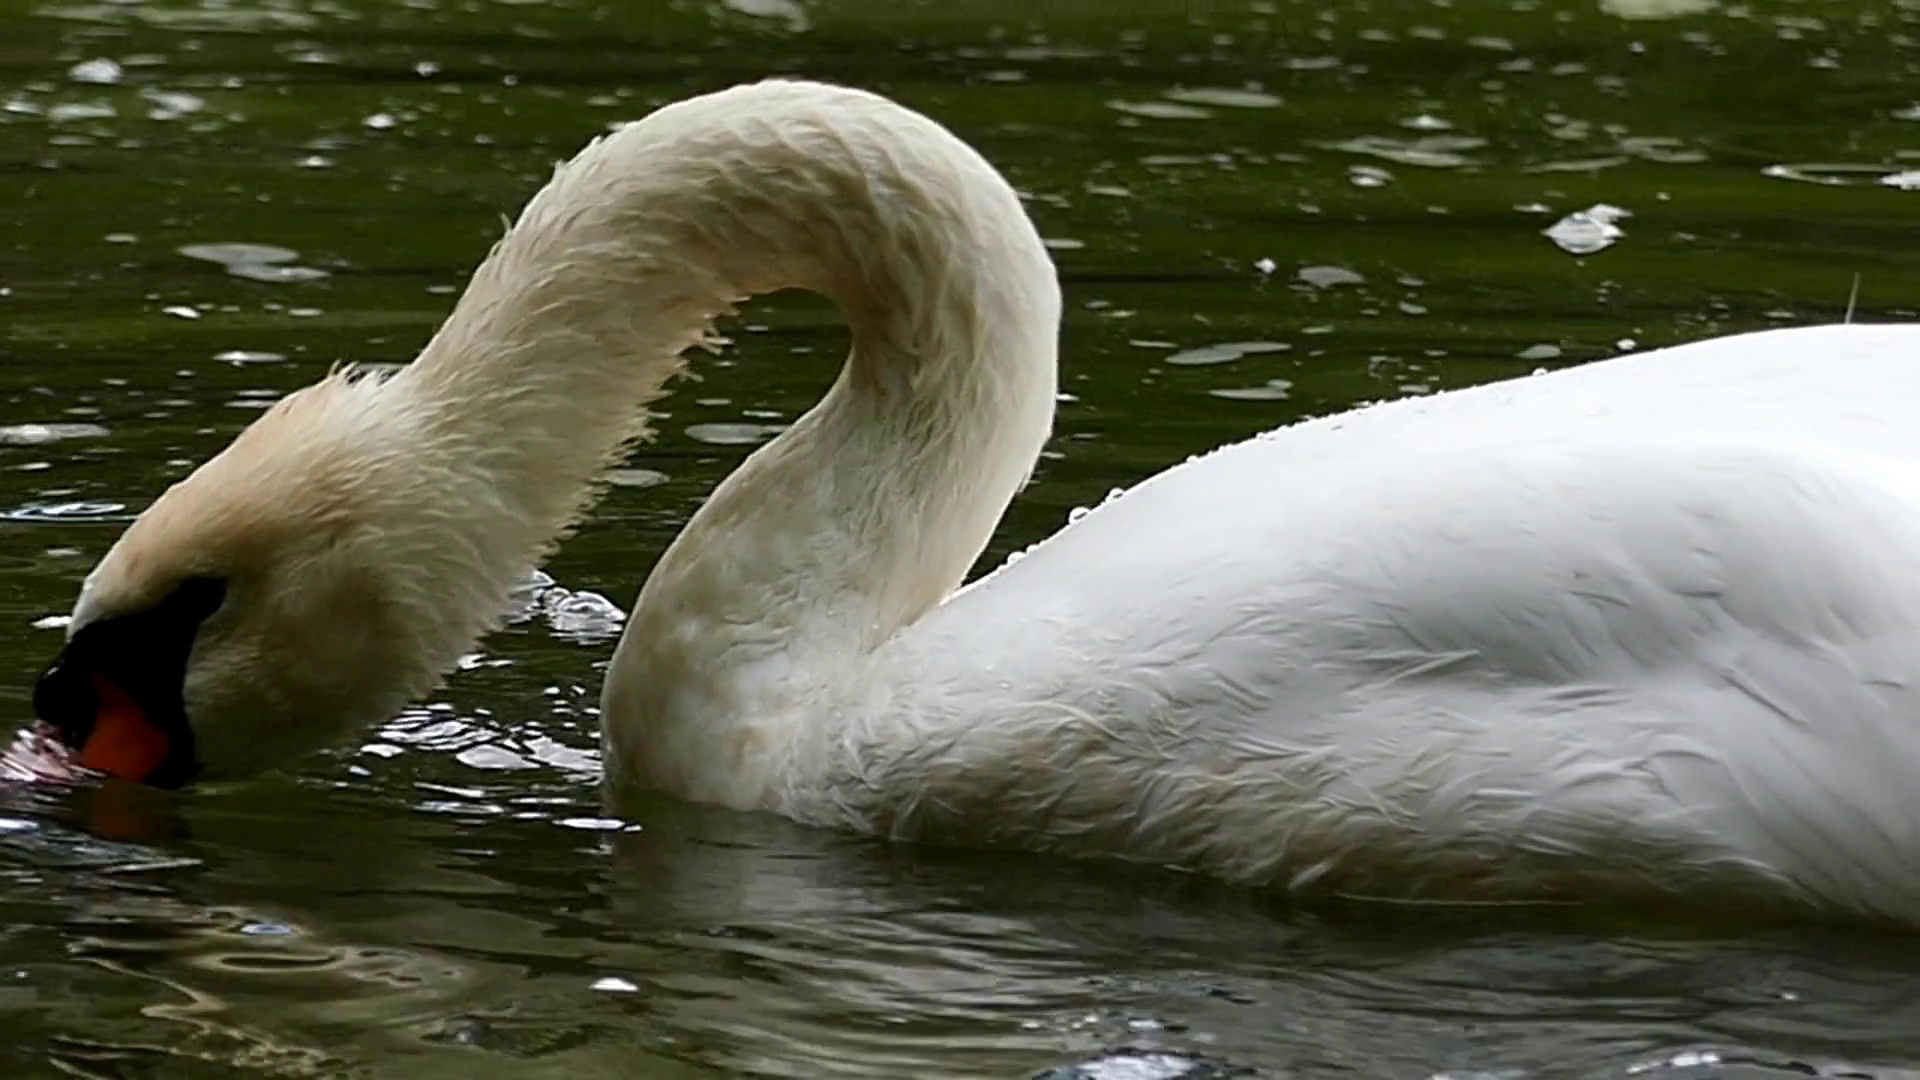 Amazing Swan in Slow Motion. the Swan Neck Pulls and Dives Under the ...